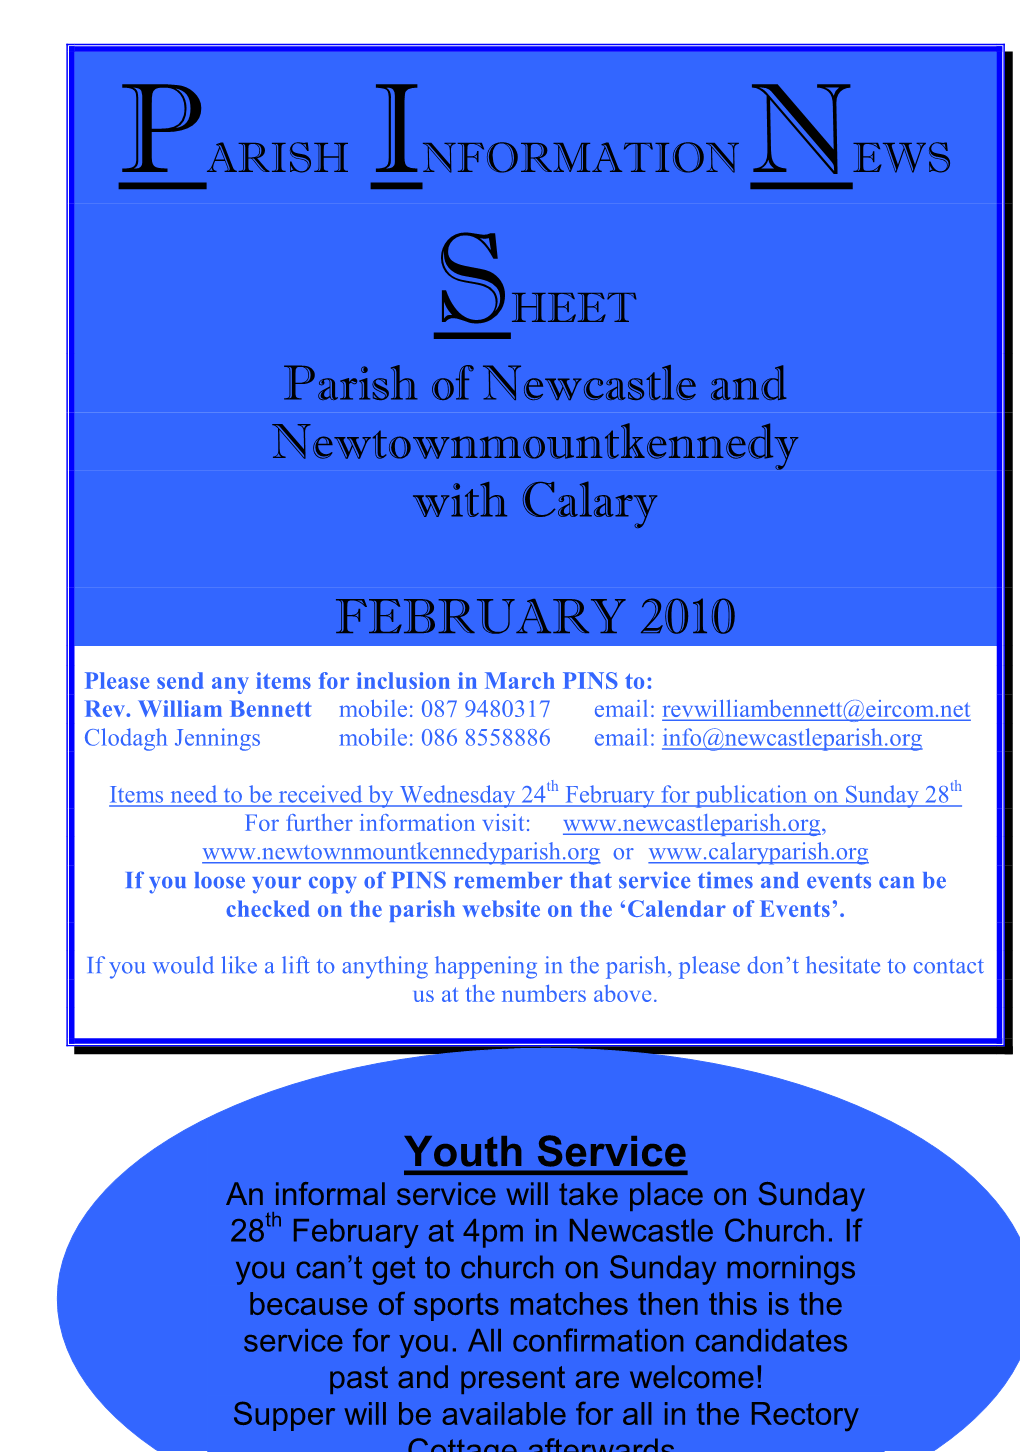 Parish of Newcastle and Newtownmountkennedy with Calary FEBRUARY 2010